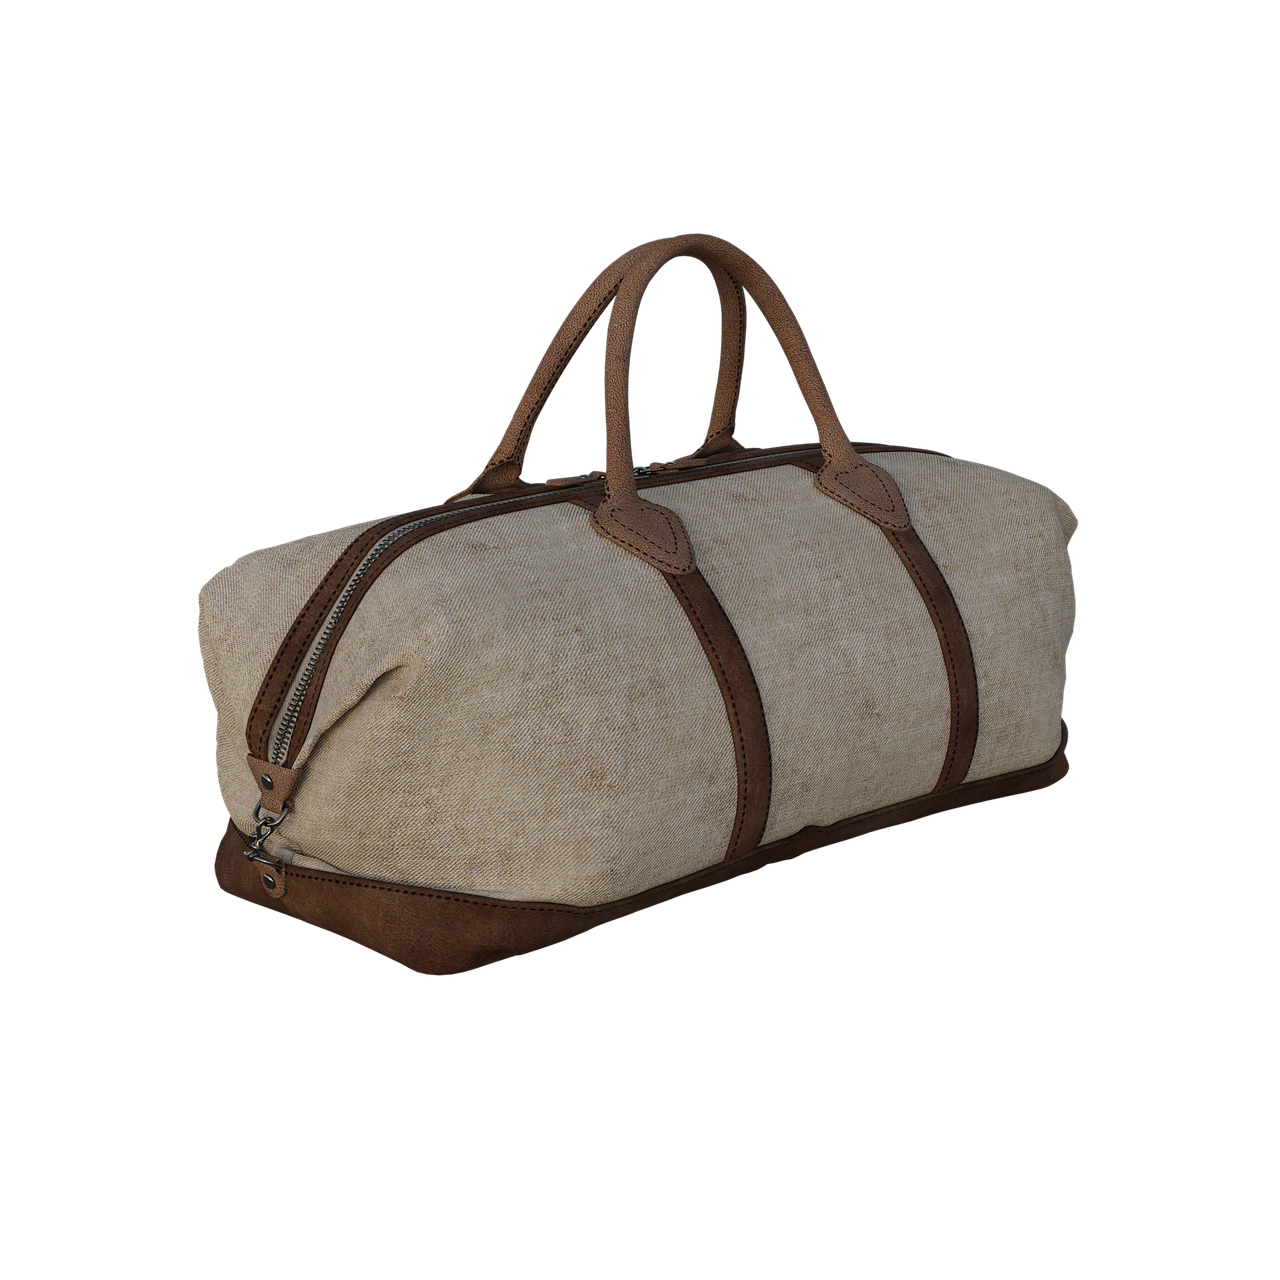 Why Choose Canvas Duffel Bag For Your Next Travel?